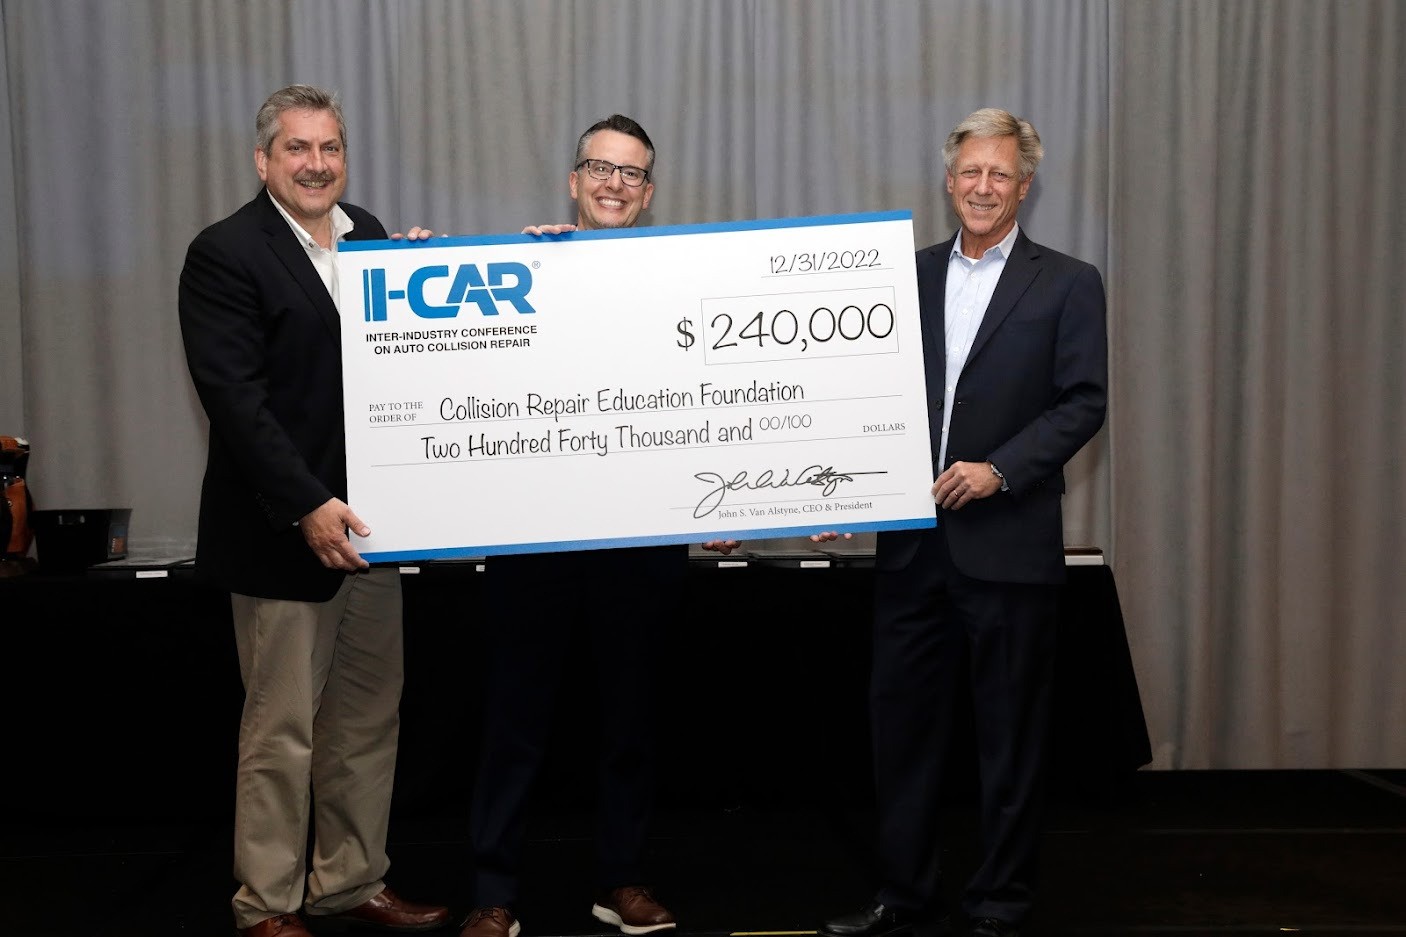 CEO making donation to support collision repair educational programs and connect students with career opportunities.